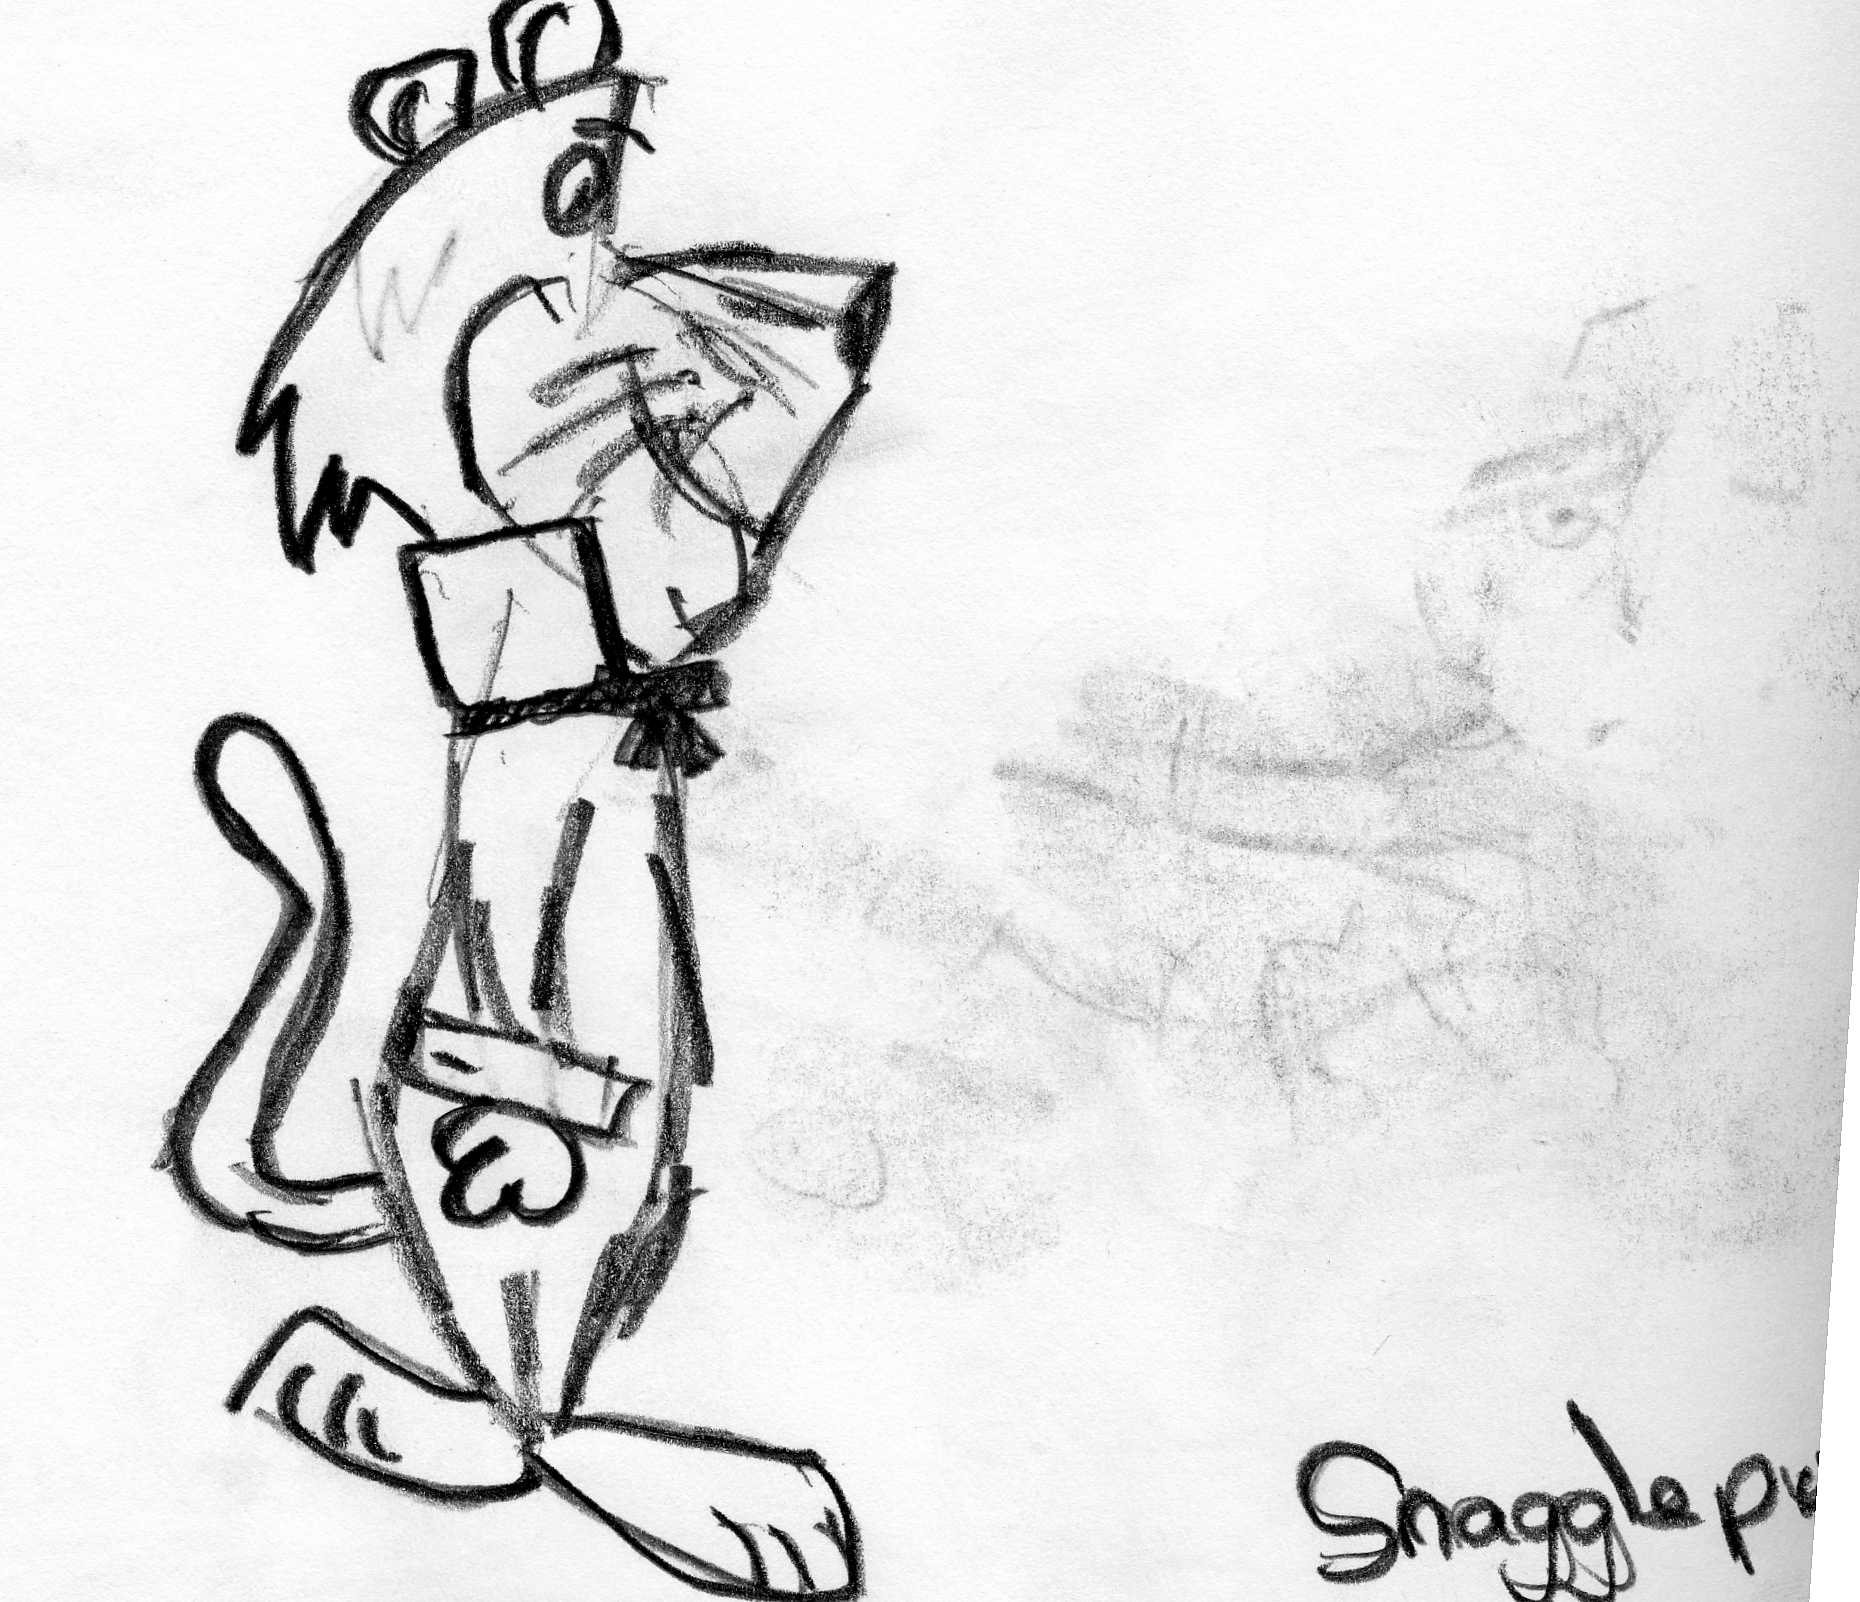 Snaggle-puss by scott_15_05